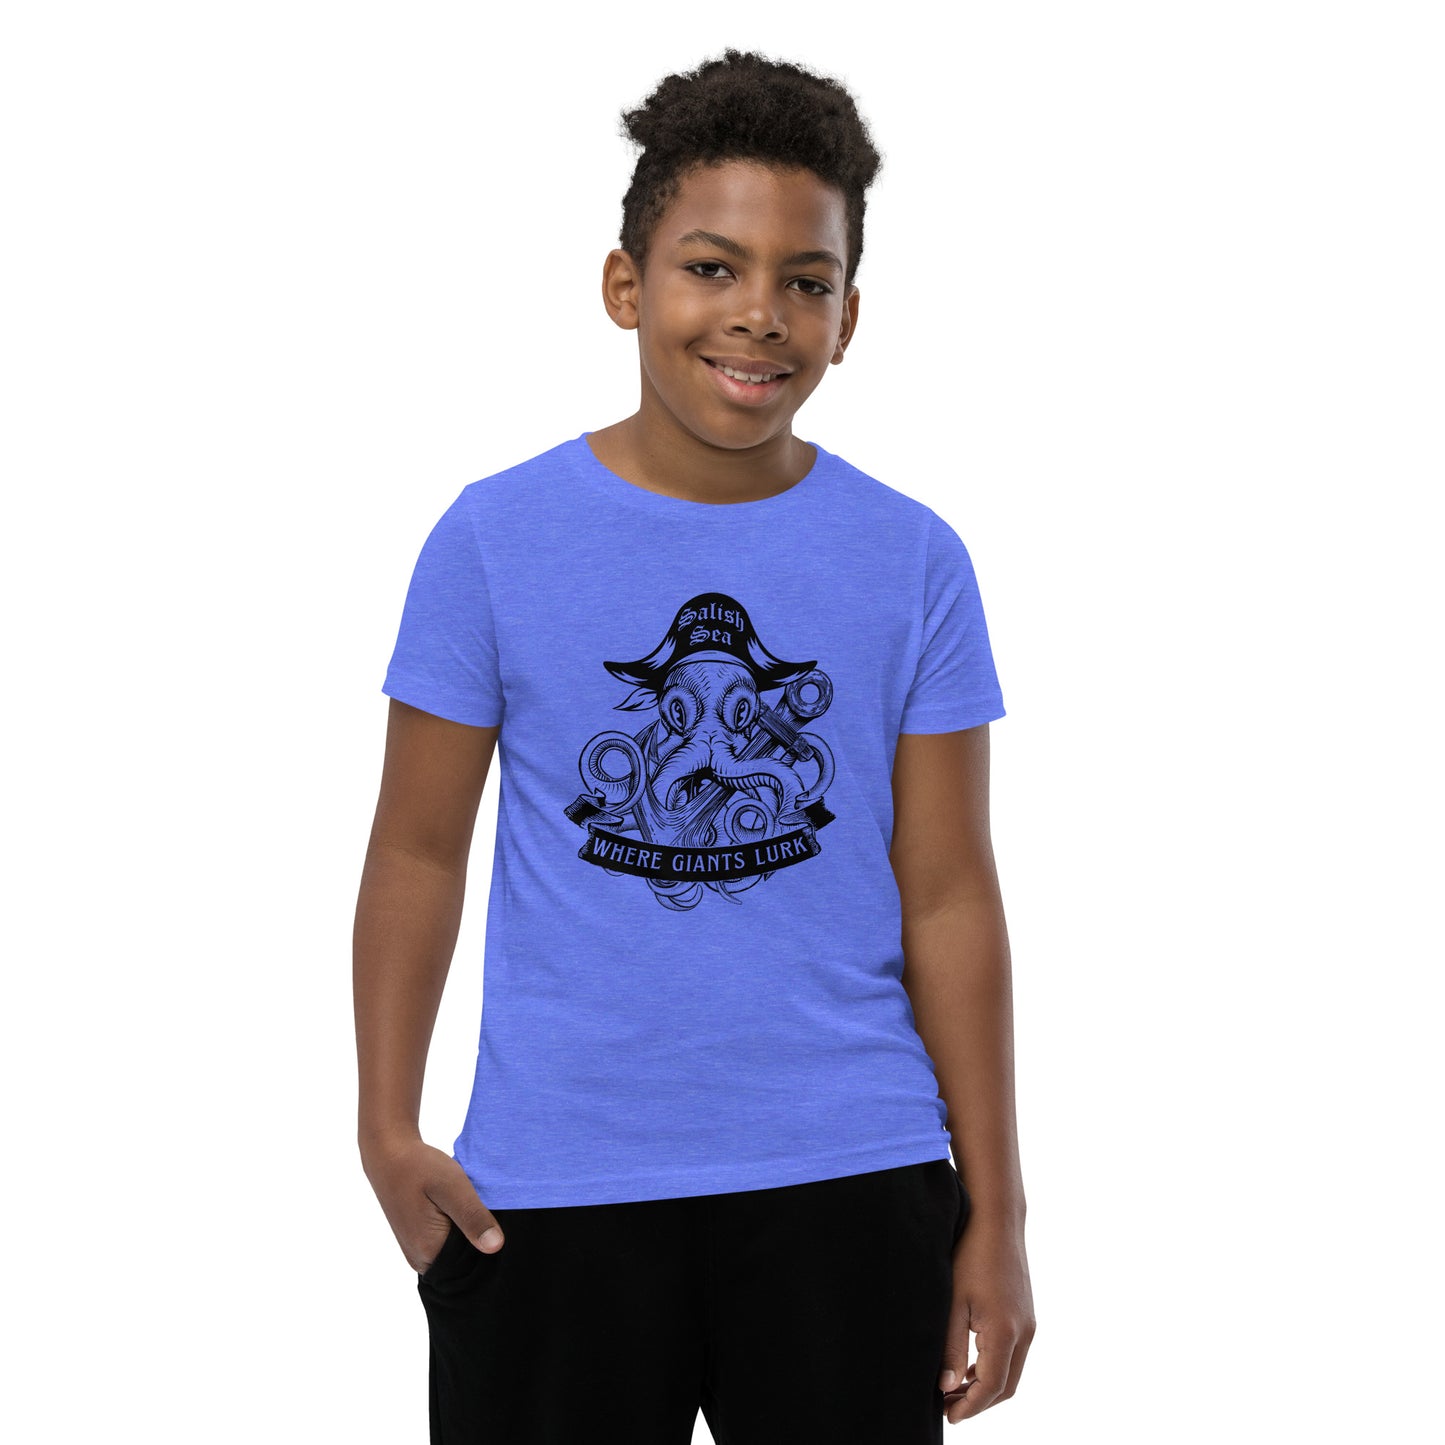 Youth / Teen - "Octo Pirate" - Short Sleeve T-Shirt